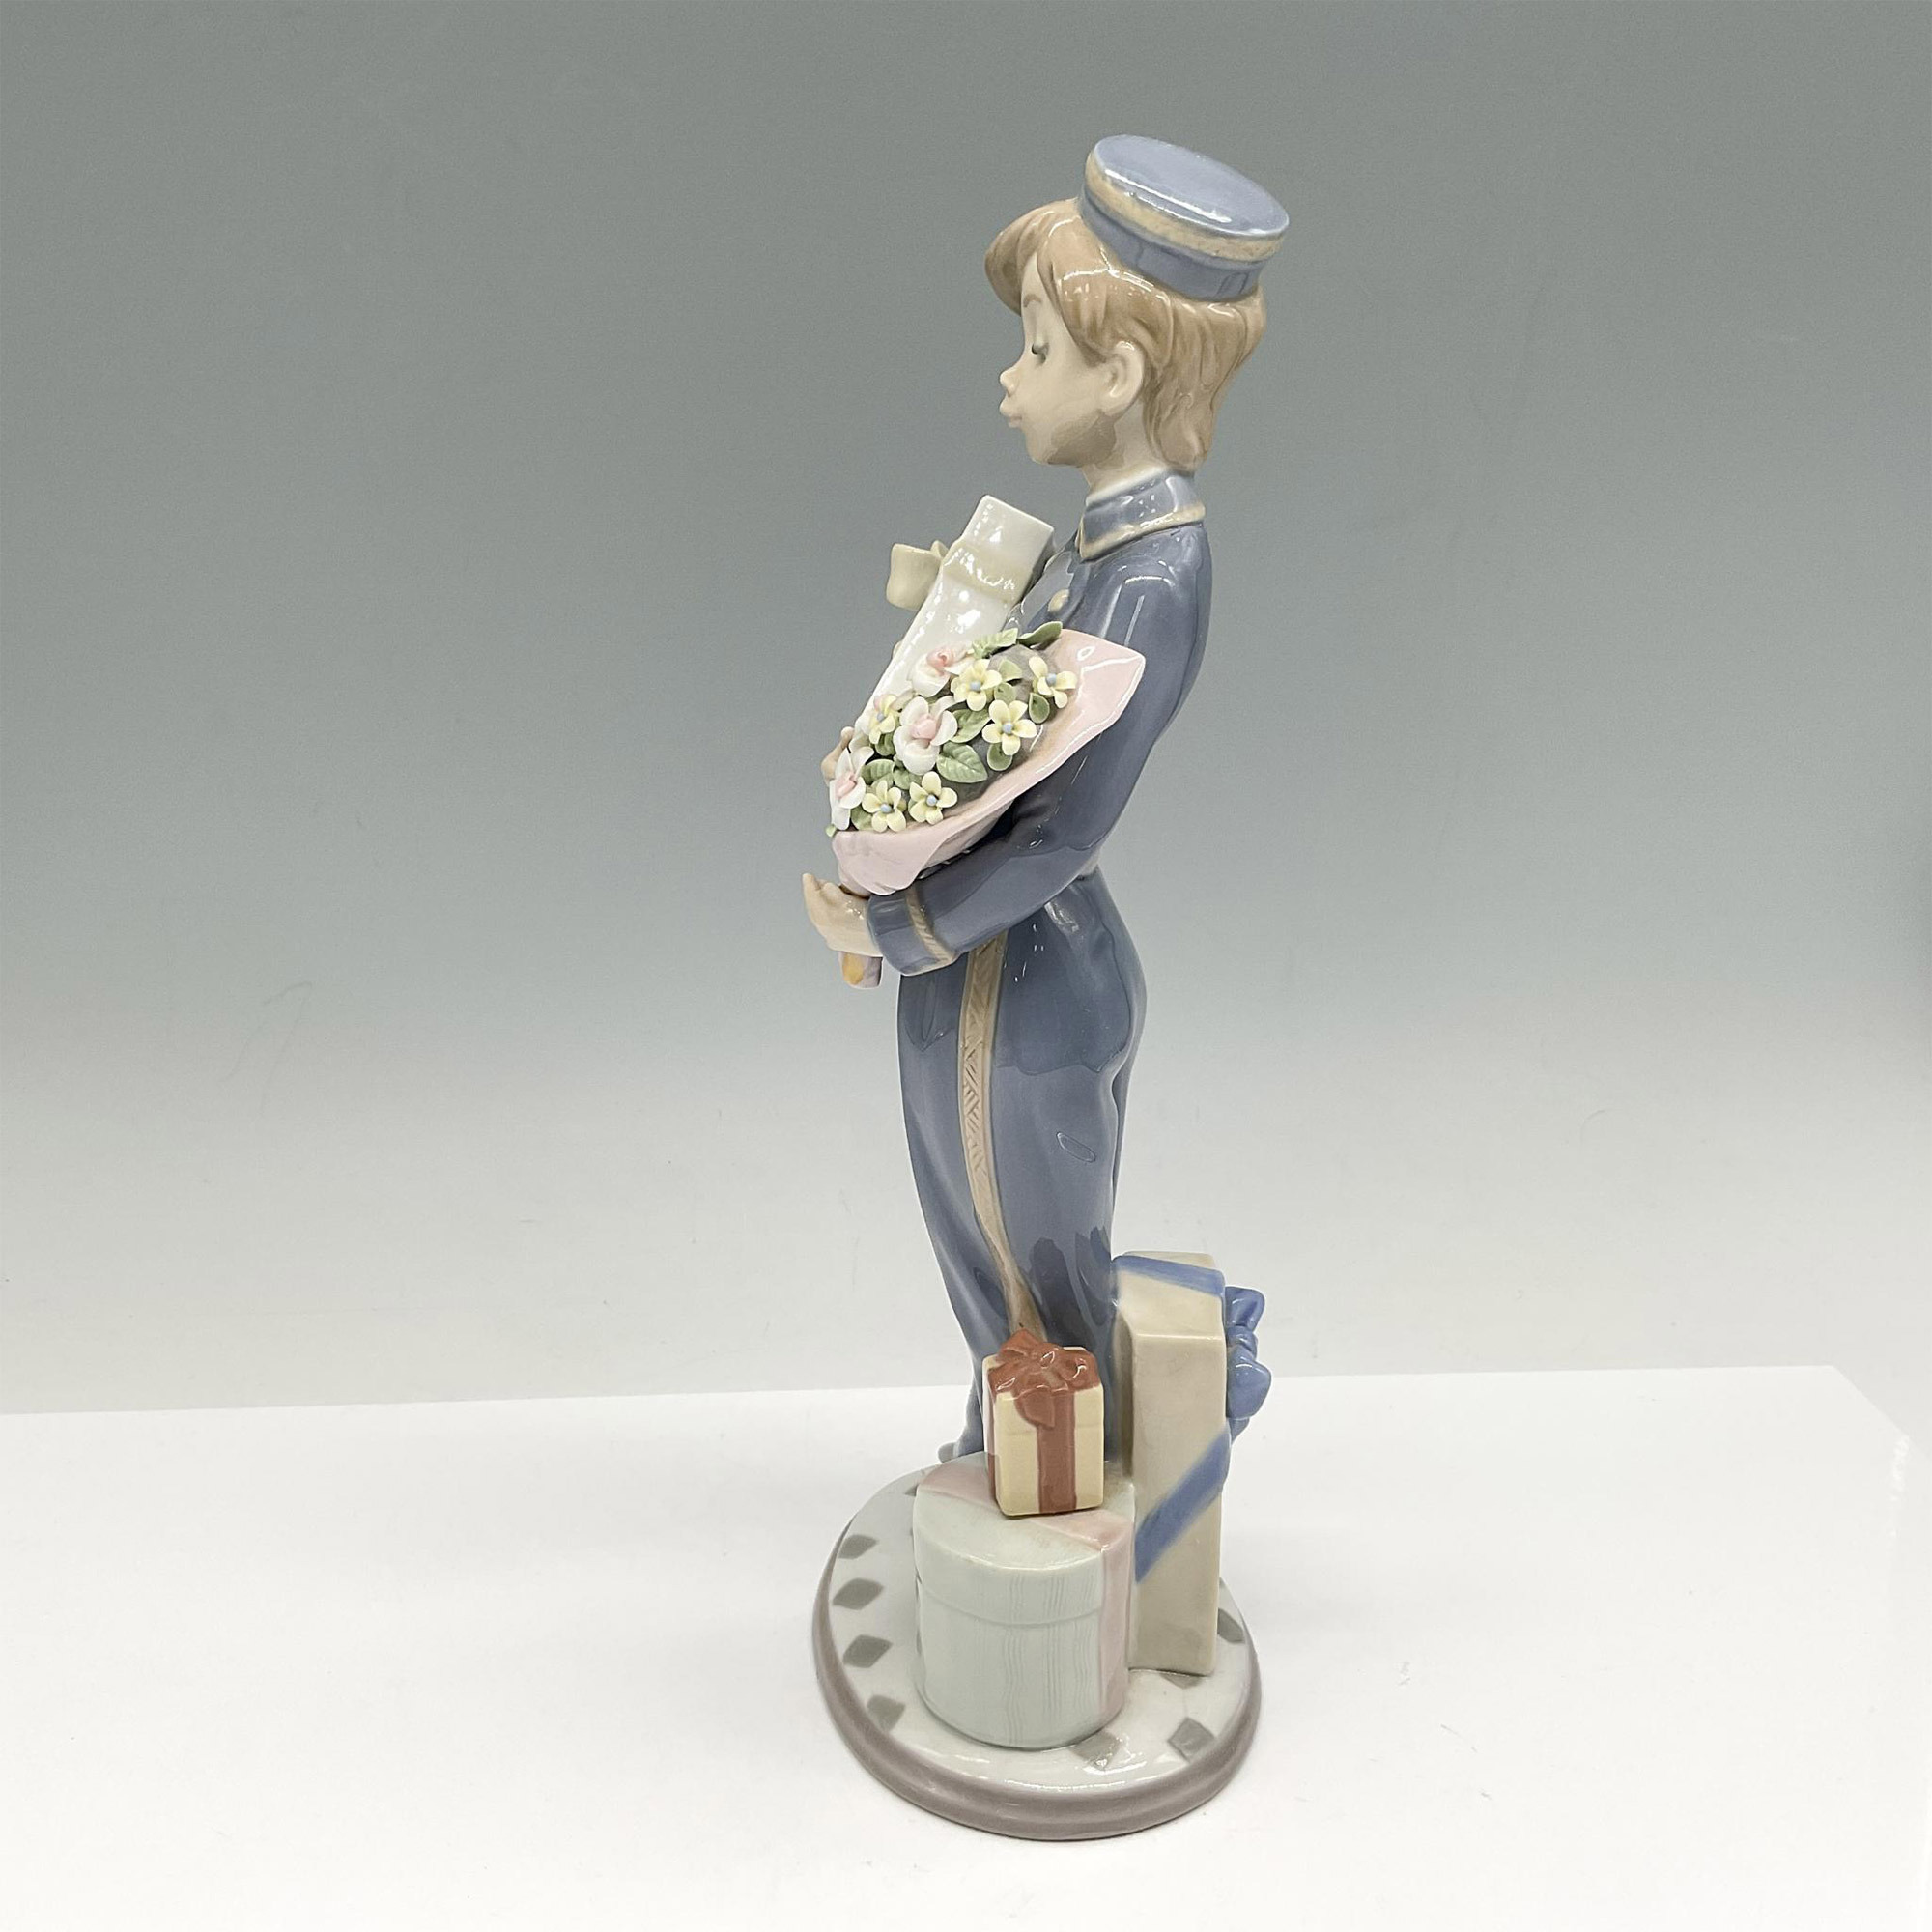 Special Delivery 1005783 - Lladro Porcelain Figurine - Image 2 of 5